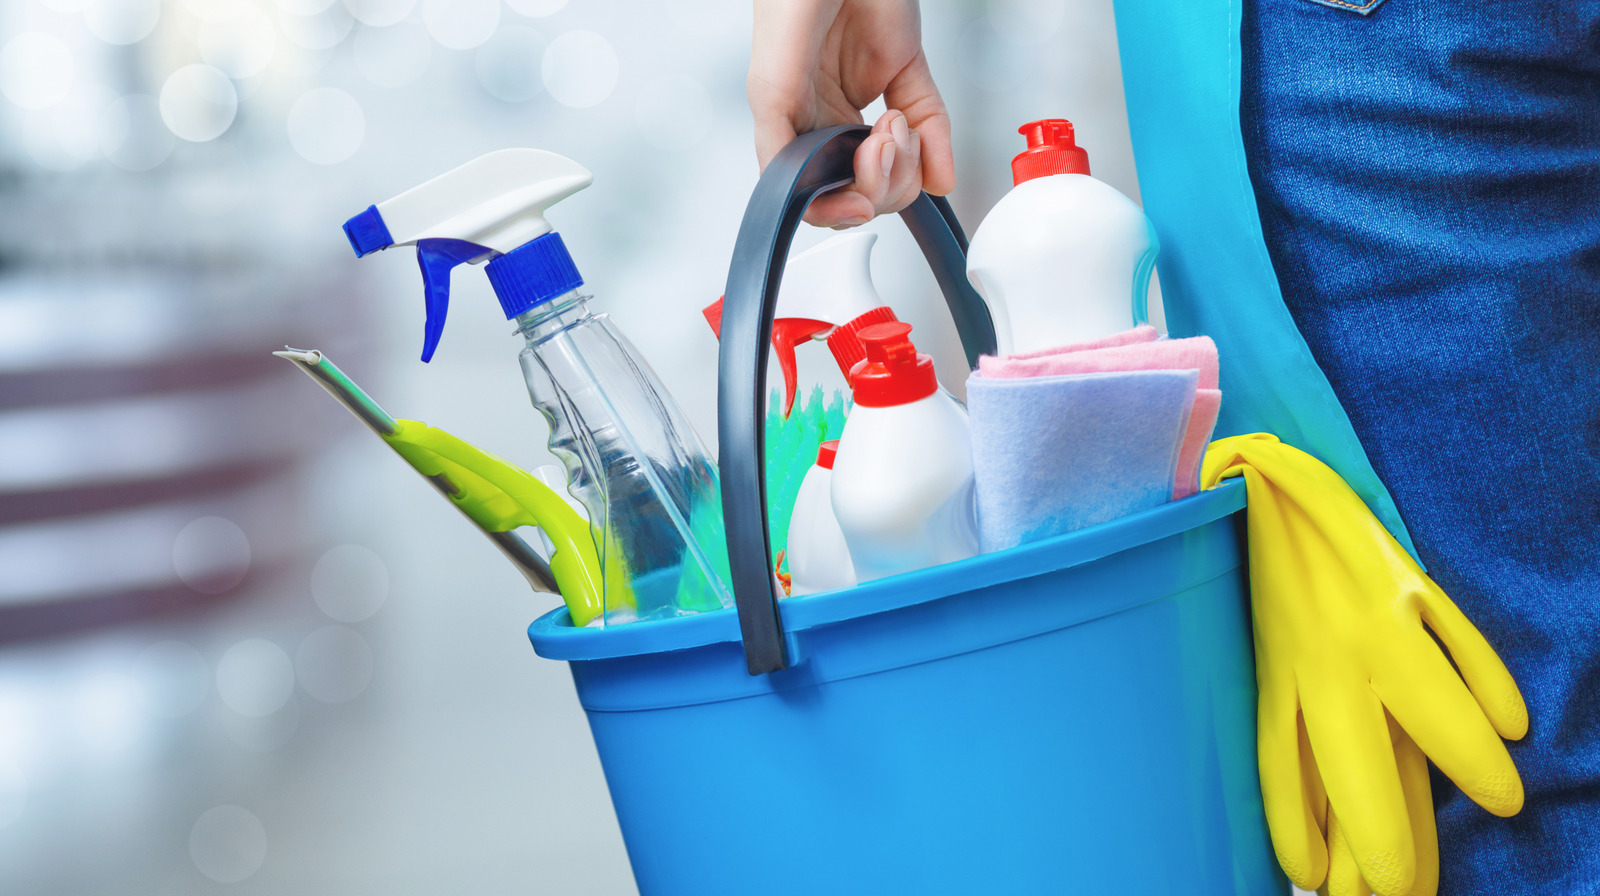 Storing cleaning products at home: safely, practically and